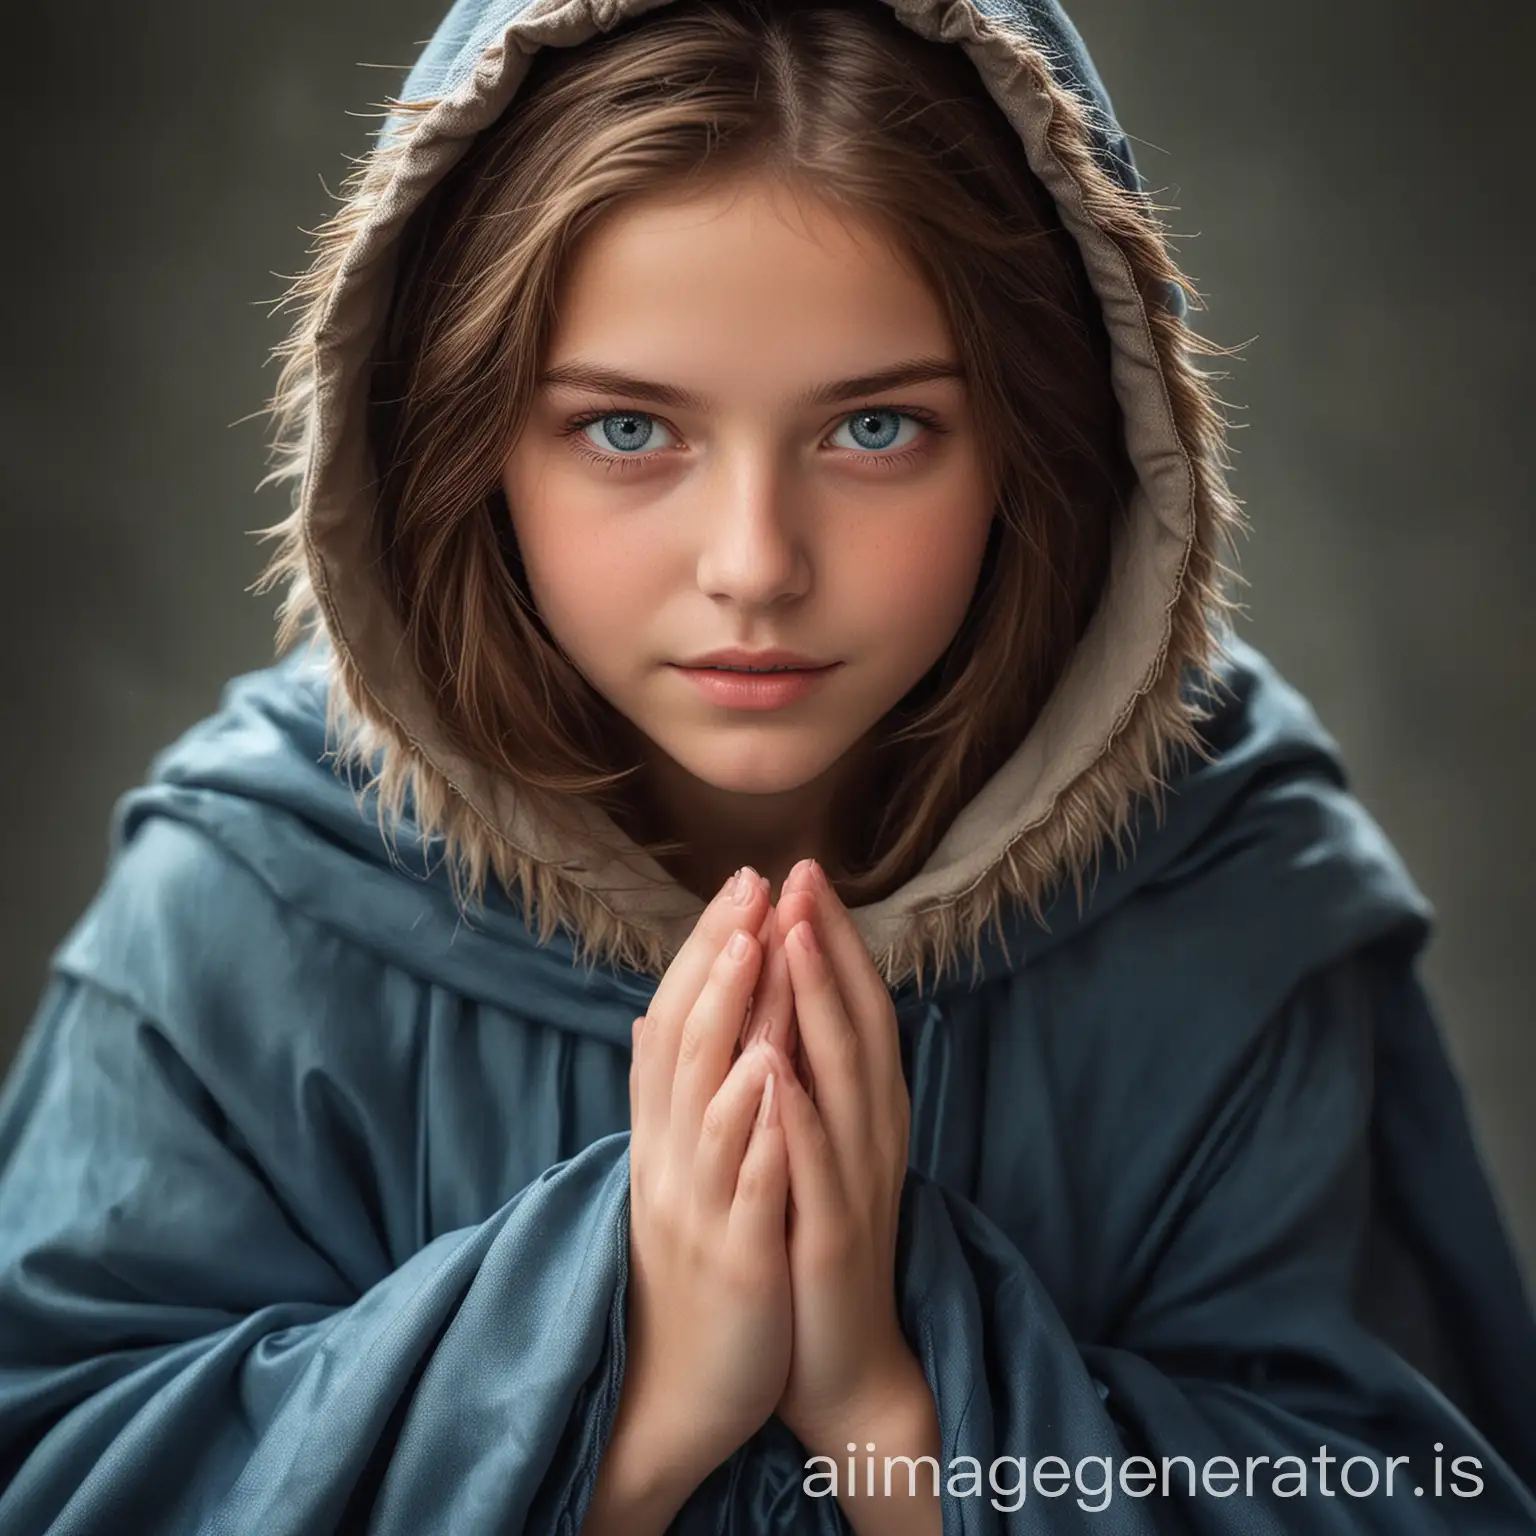 16 year old girl feather hands brown hair blue eyes in blue cloak